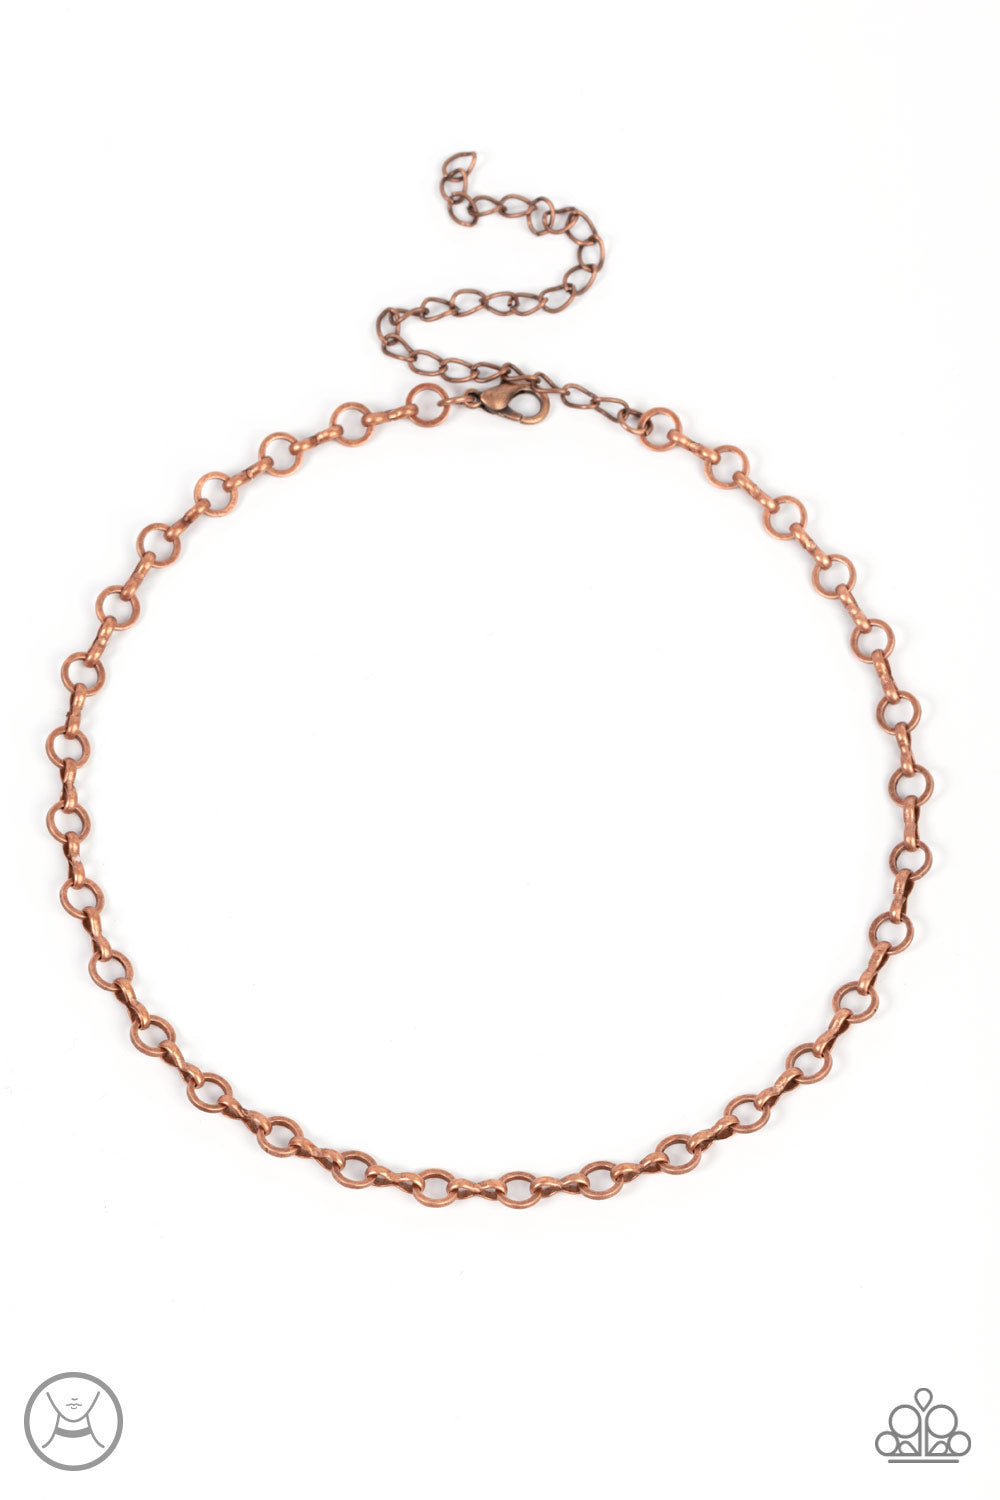 Keepin it Chic Paparazzi Accessories Choker with Earrings -Copper